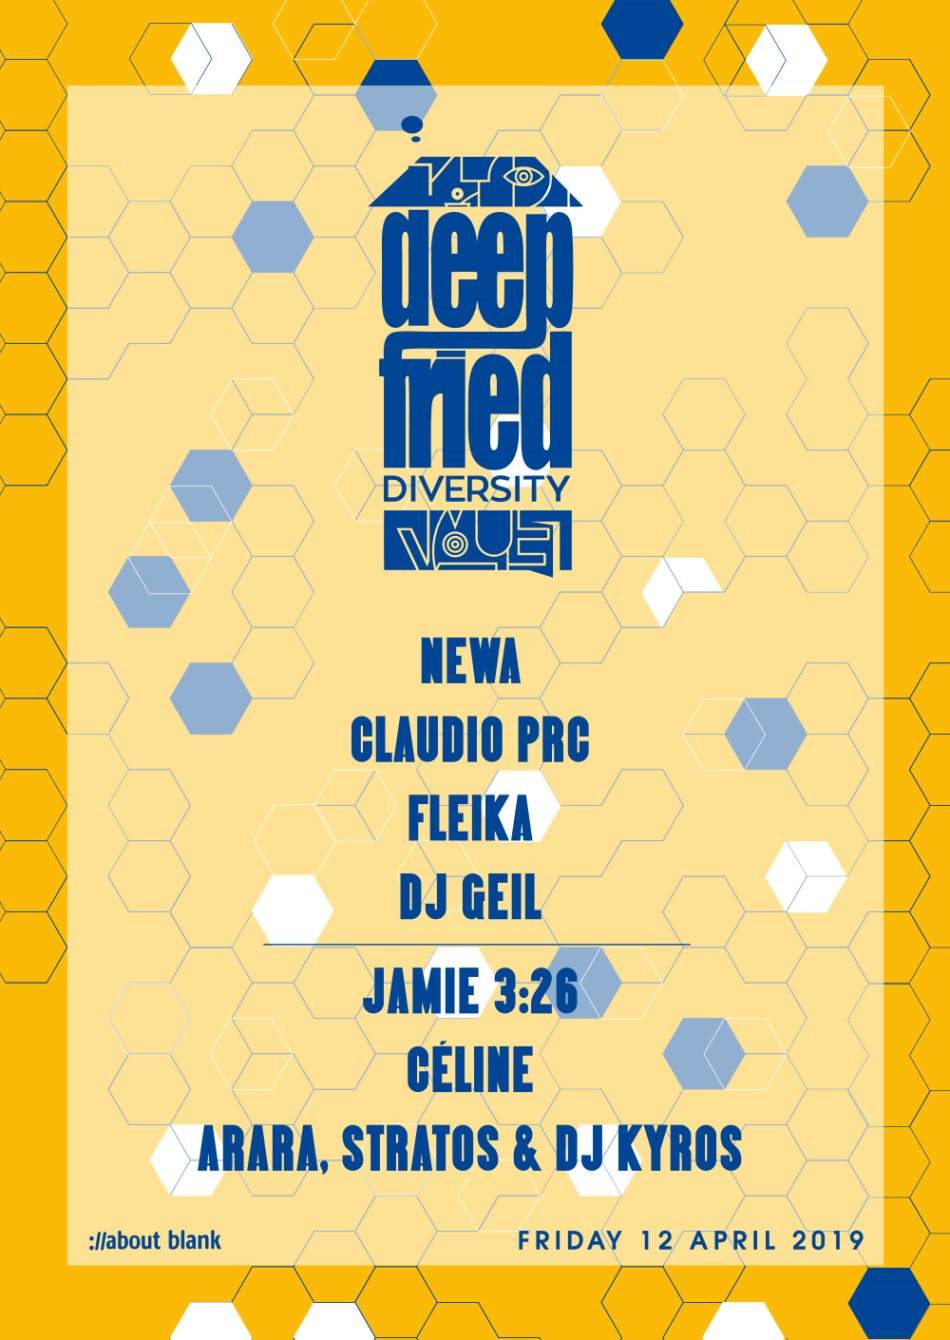 Deep Fried x Diversity with Jamie 3:26, Claudio PRC, Newa & More - フライヤー表